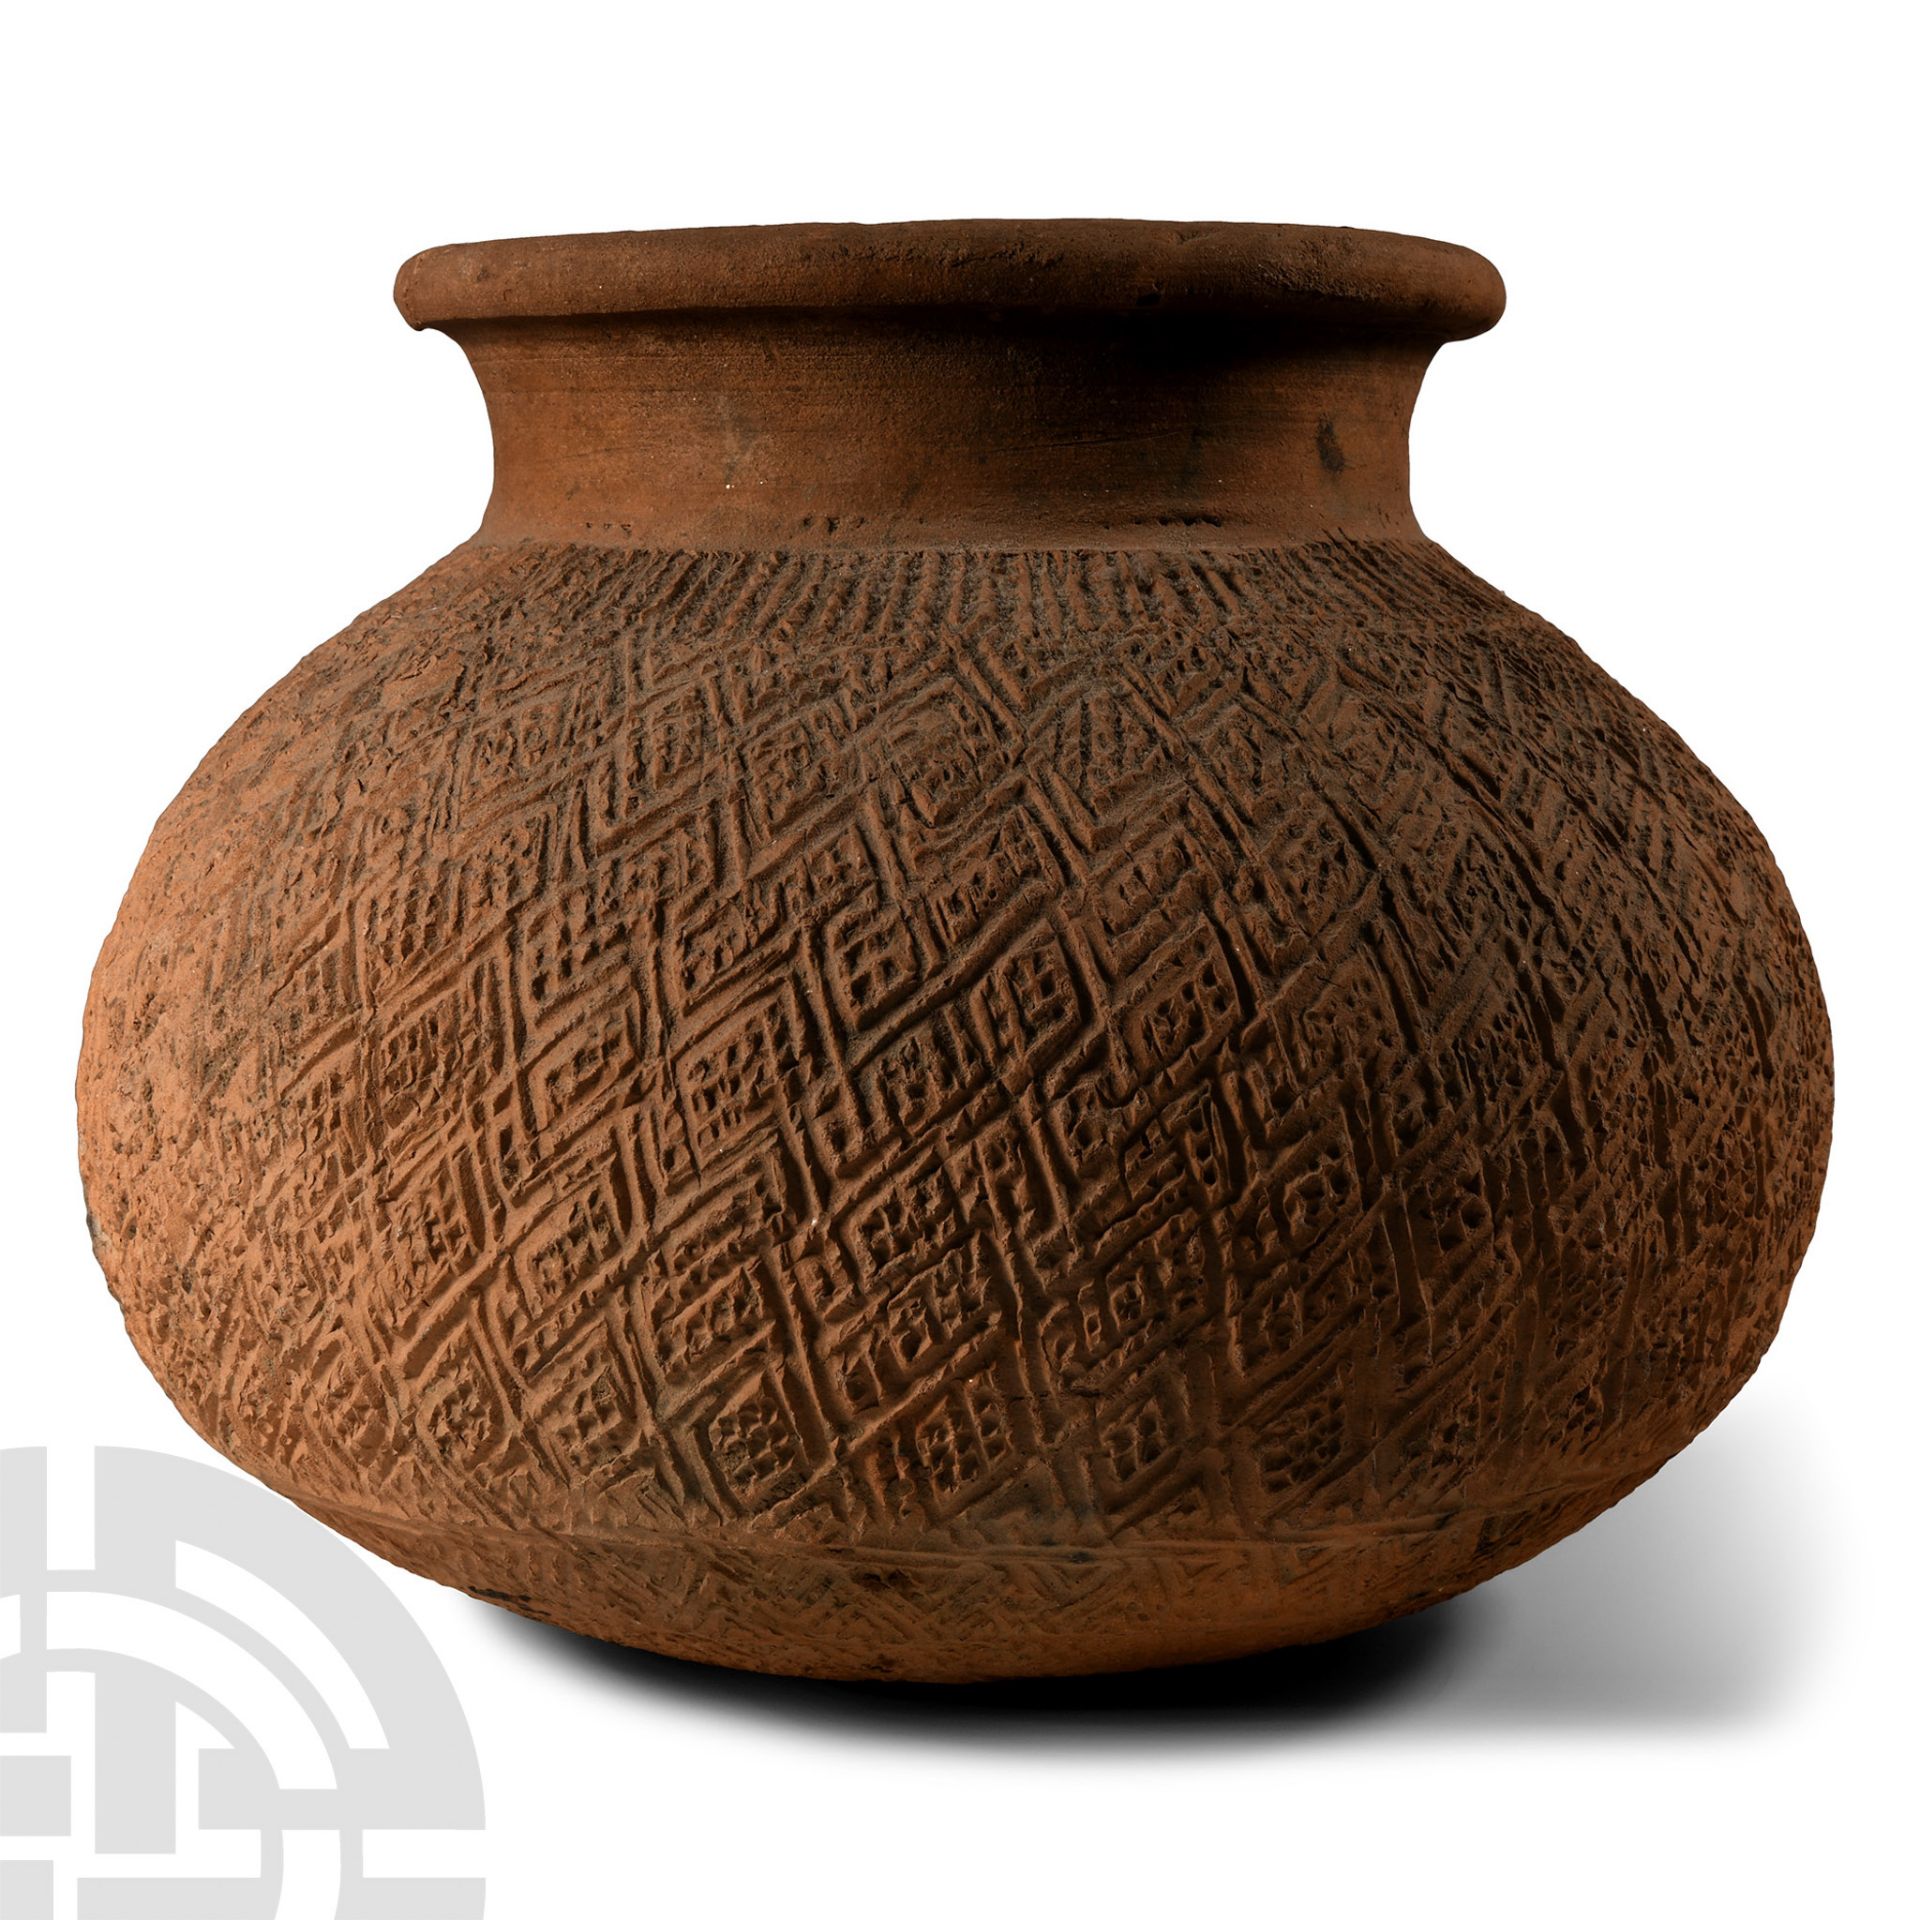 South East Asian Large Terracotta Vessel